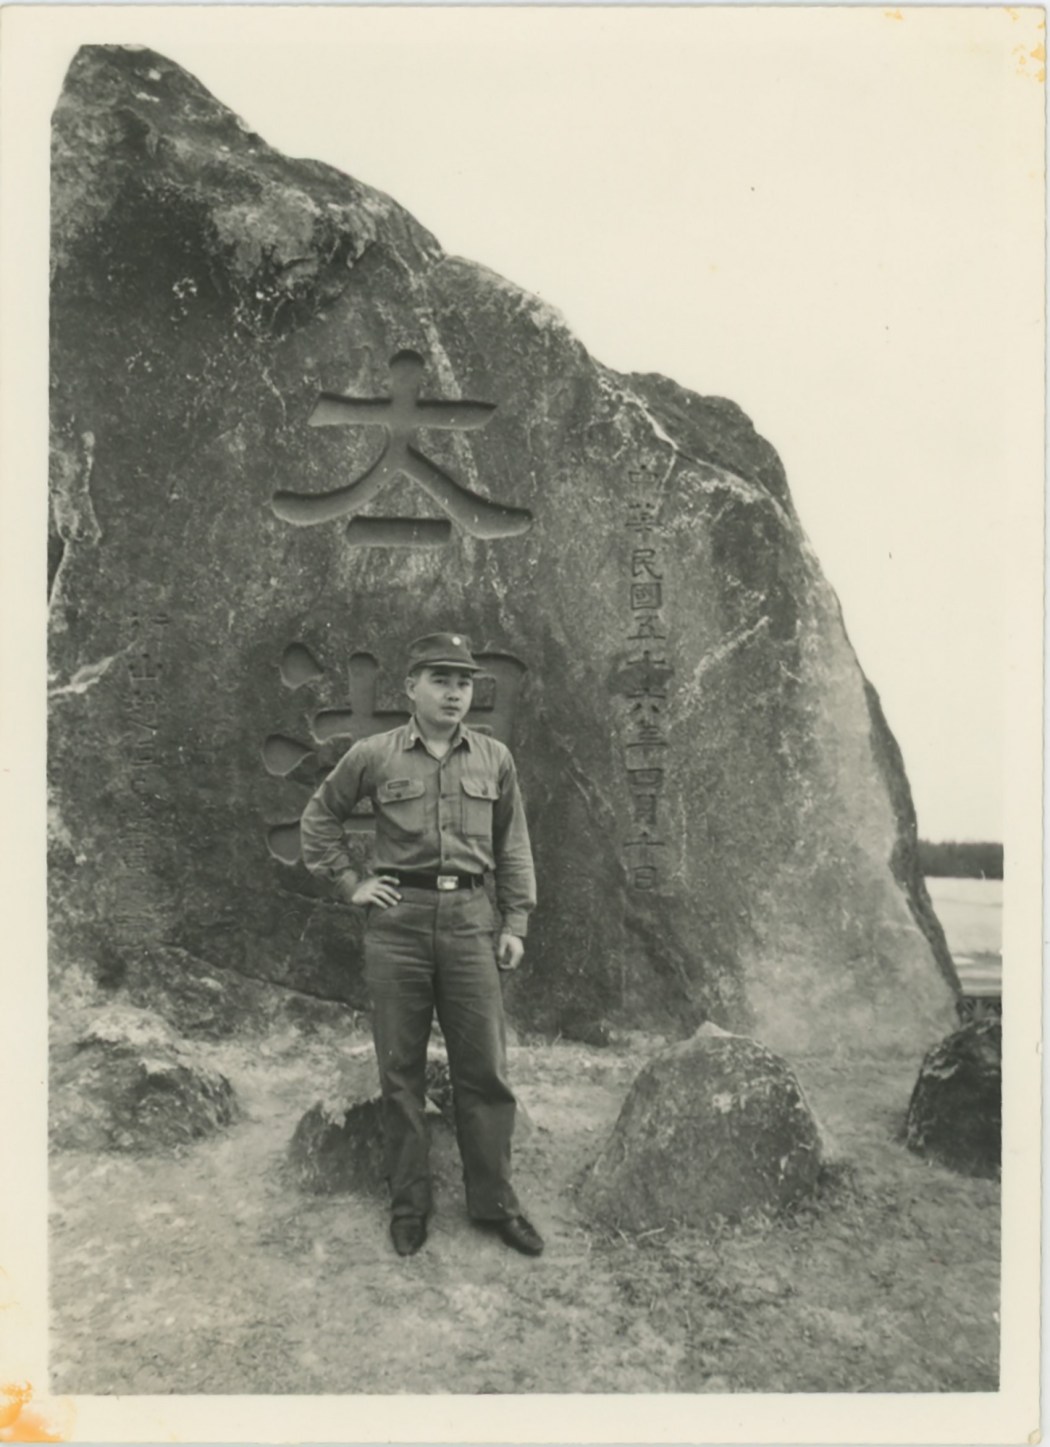 Director S. Leo Chiang’s father, Ying-Lung Chiang, served in Kinmen in 1968.
Photo: Courtesy of Ying-Lung Chang
